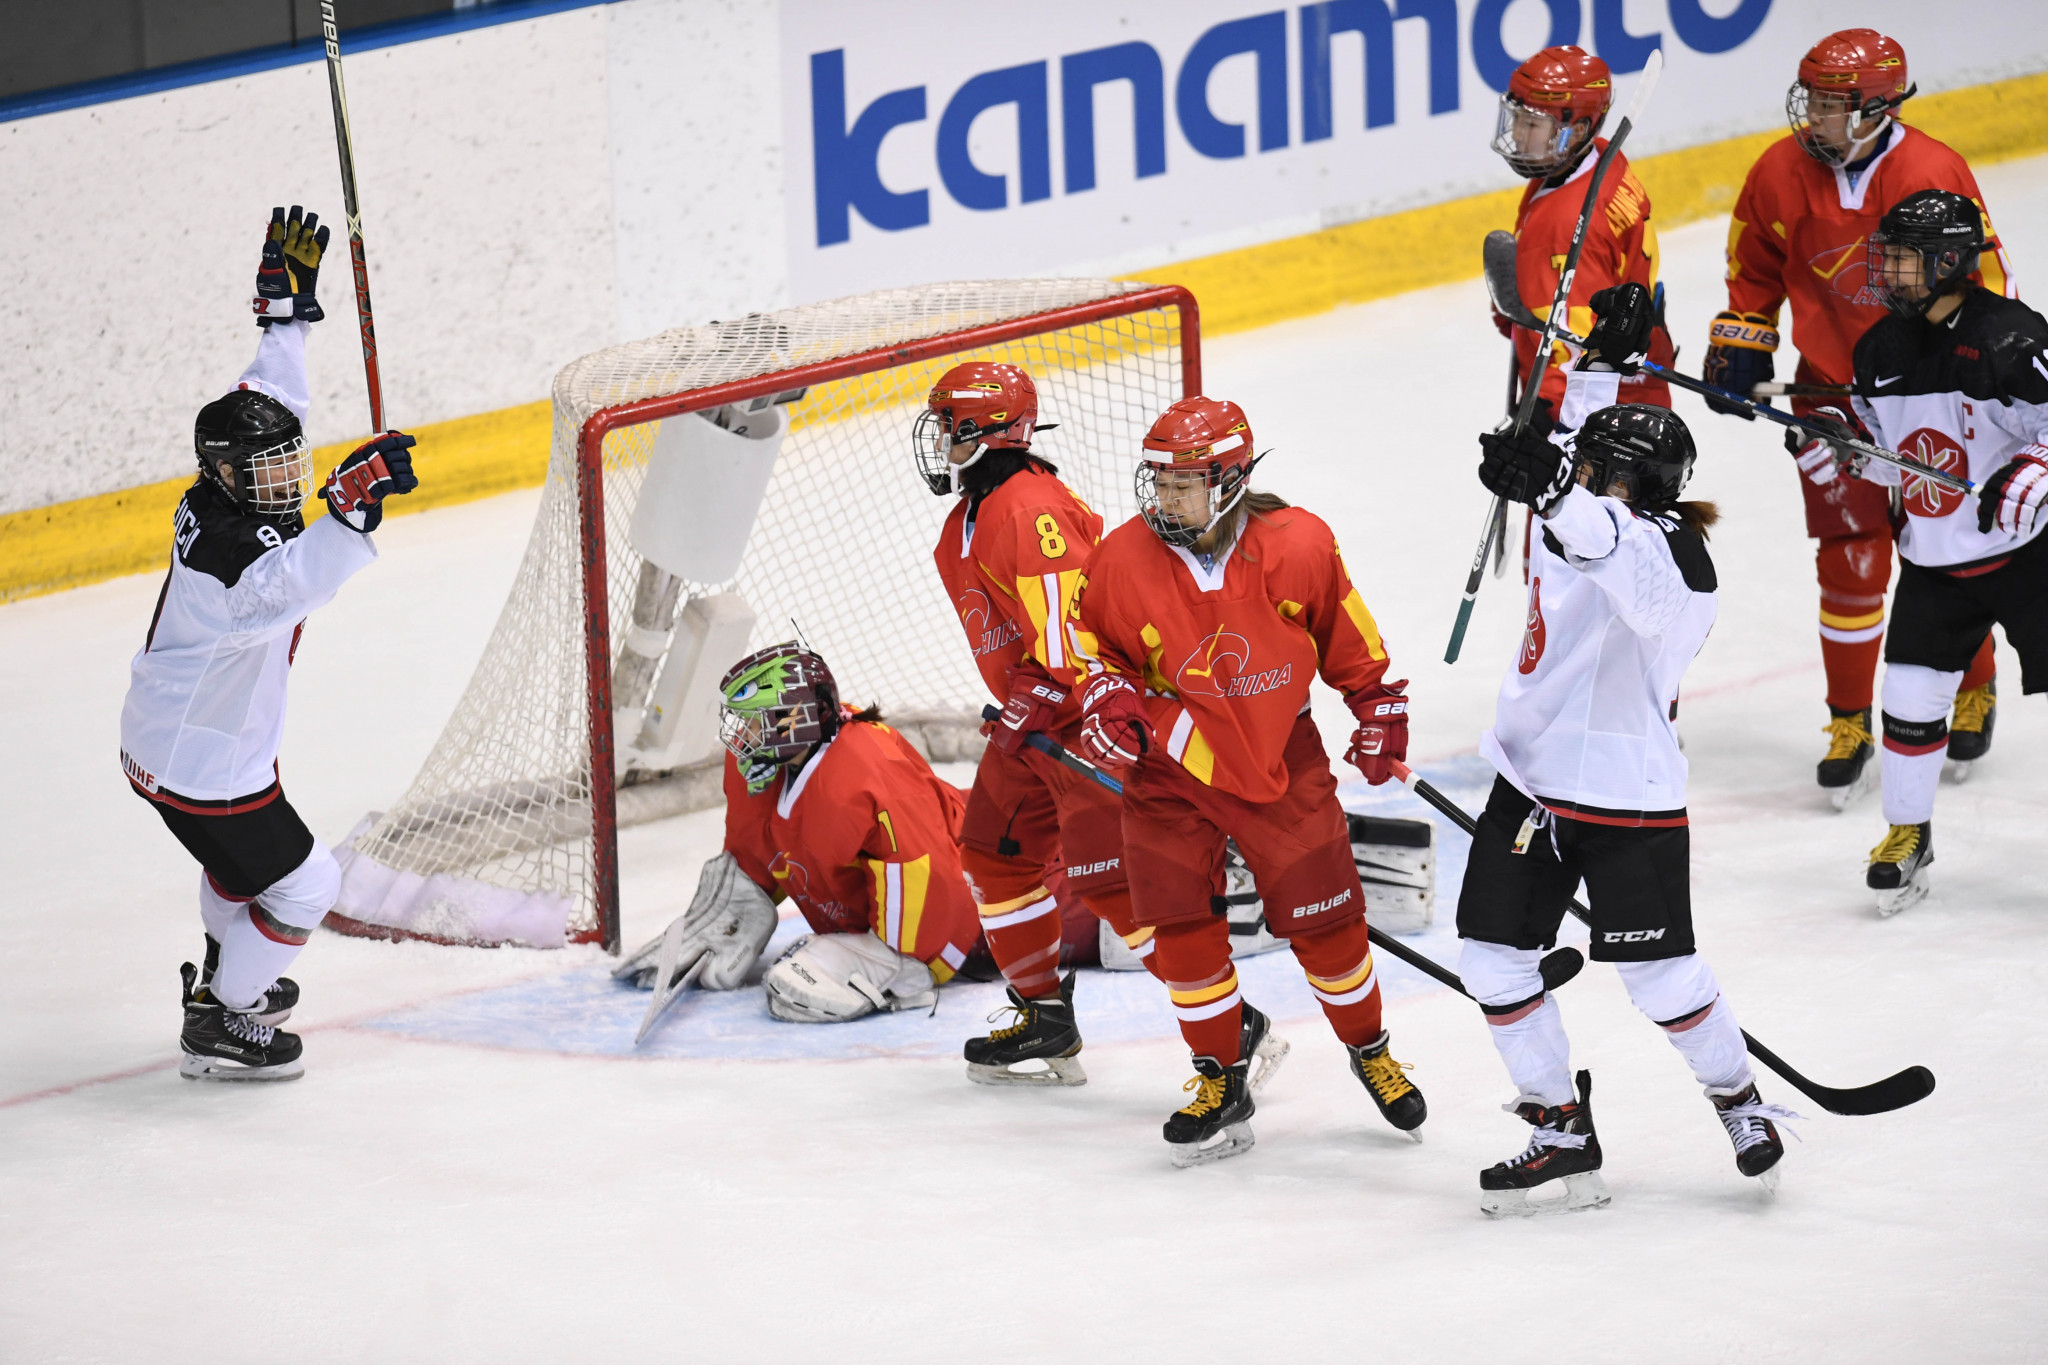 Chinese ice hockey told to improve to justify Beijing 2022 host nation spot